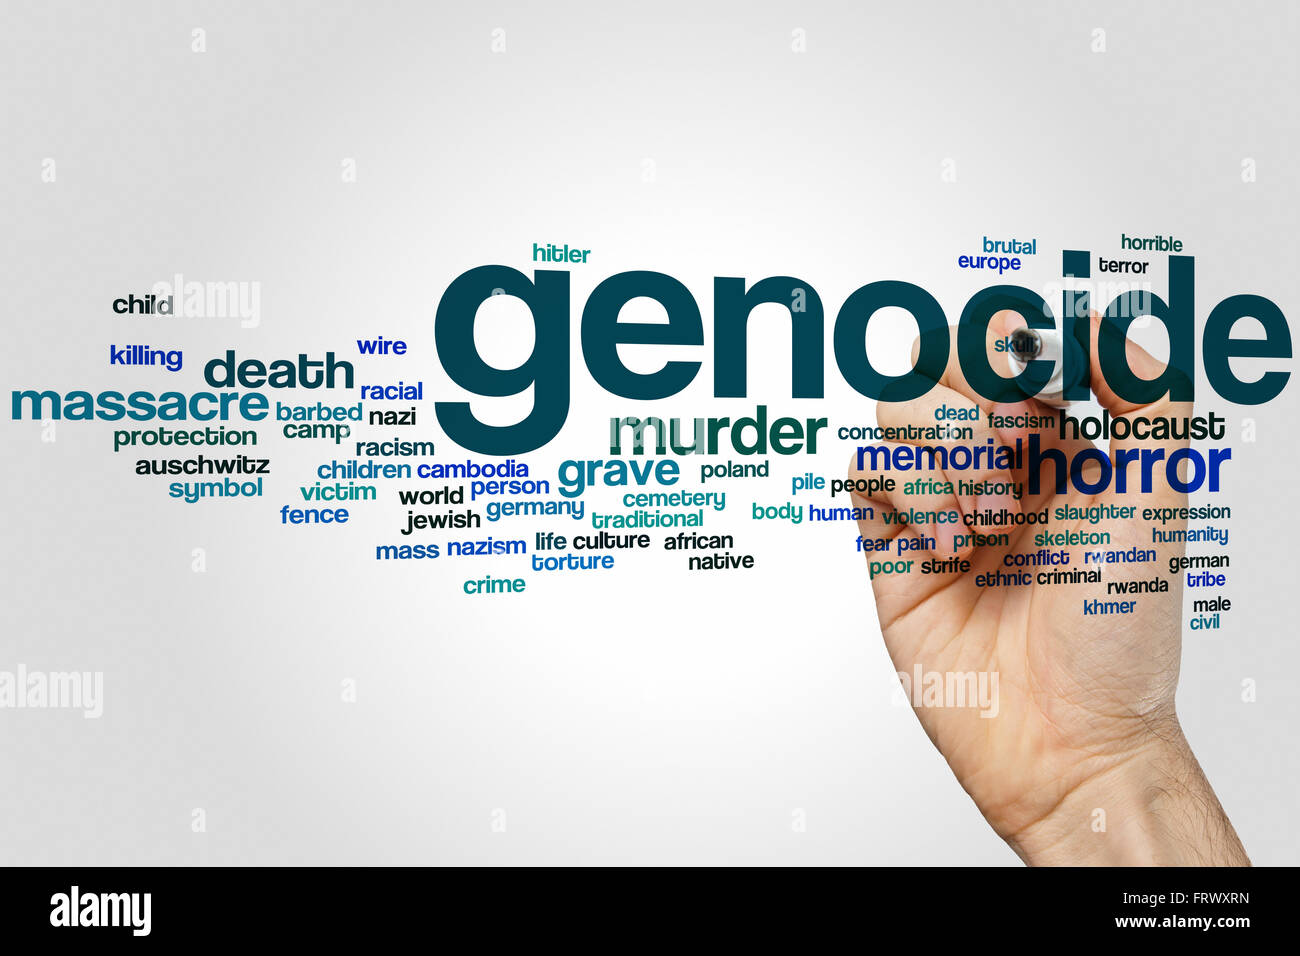 Genocide word cloud concept Stock Photo